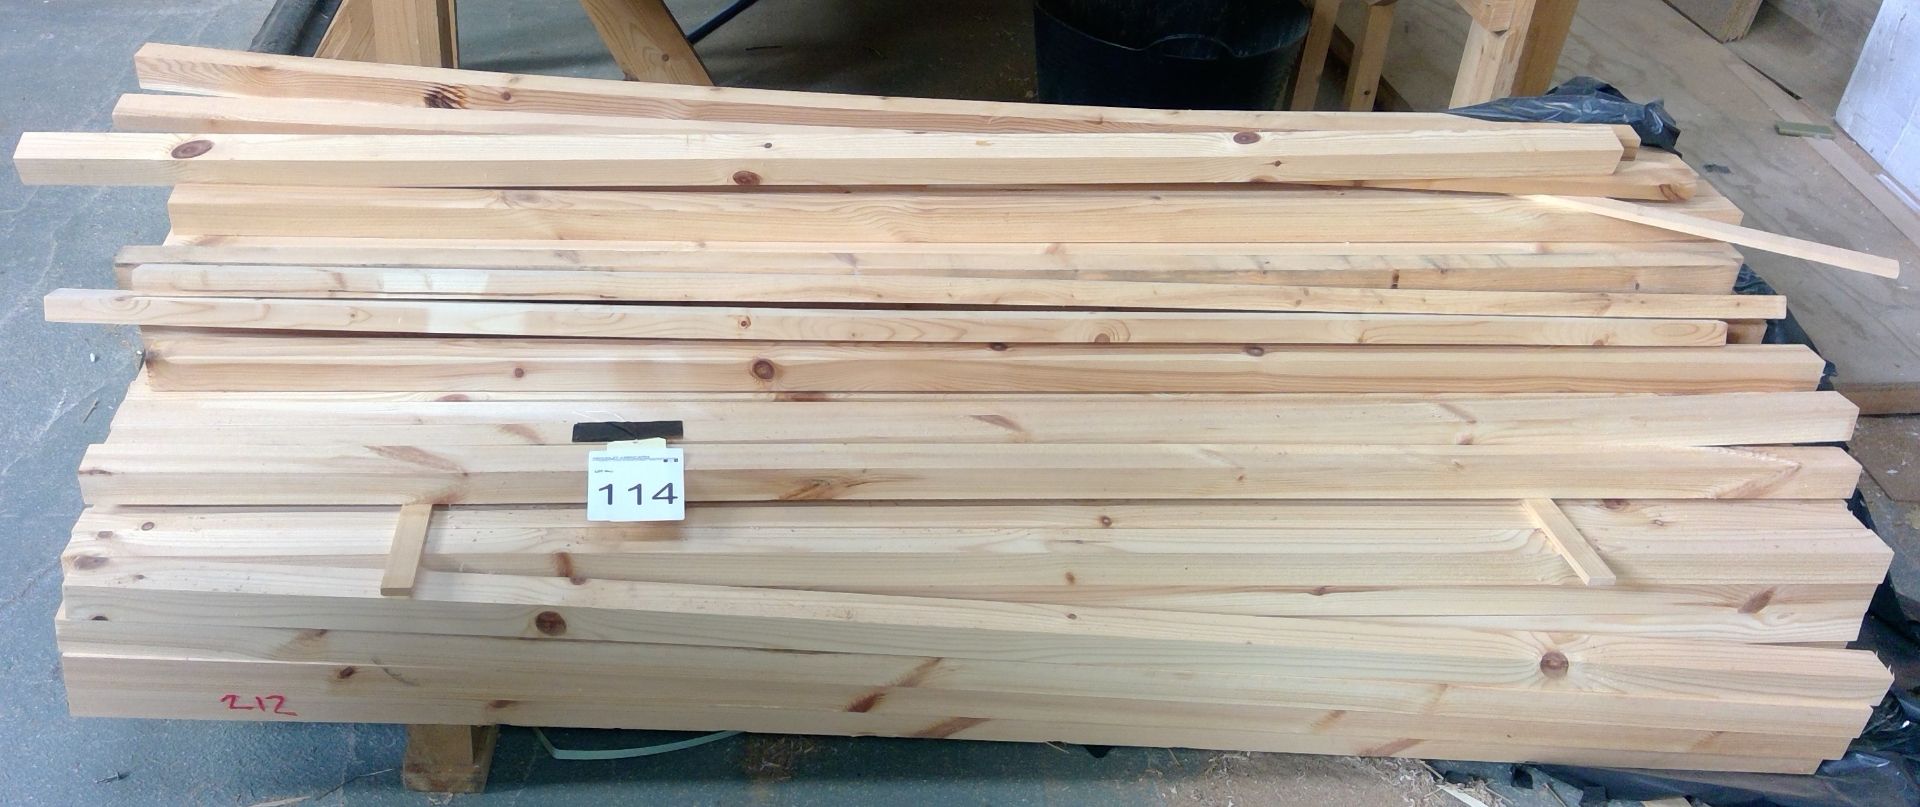 Quantity of 2m x 50mm x 50mm planed timber